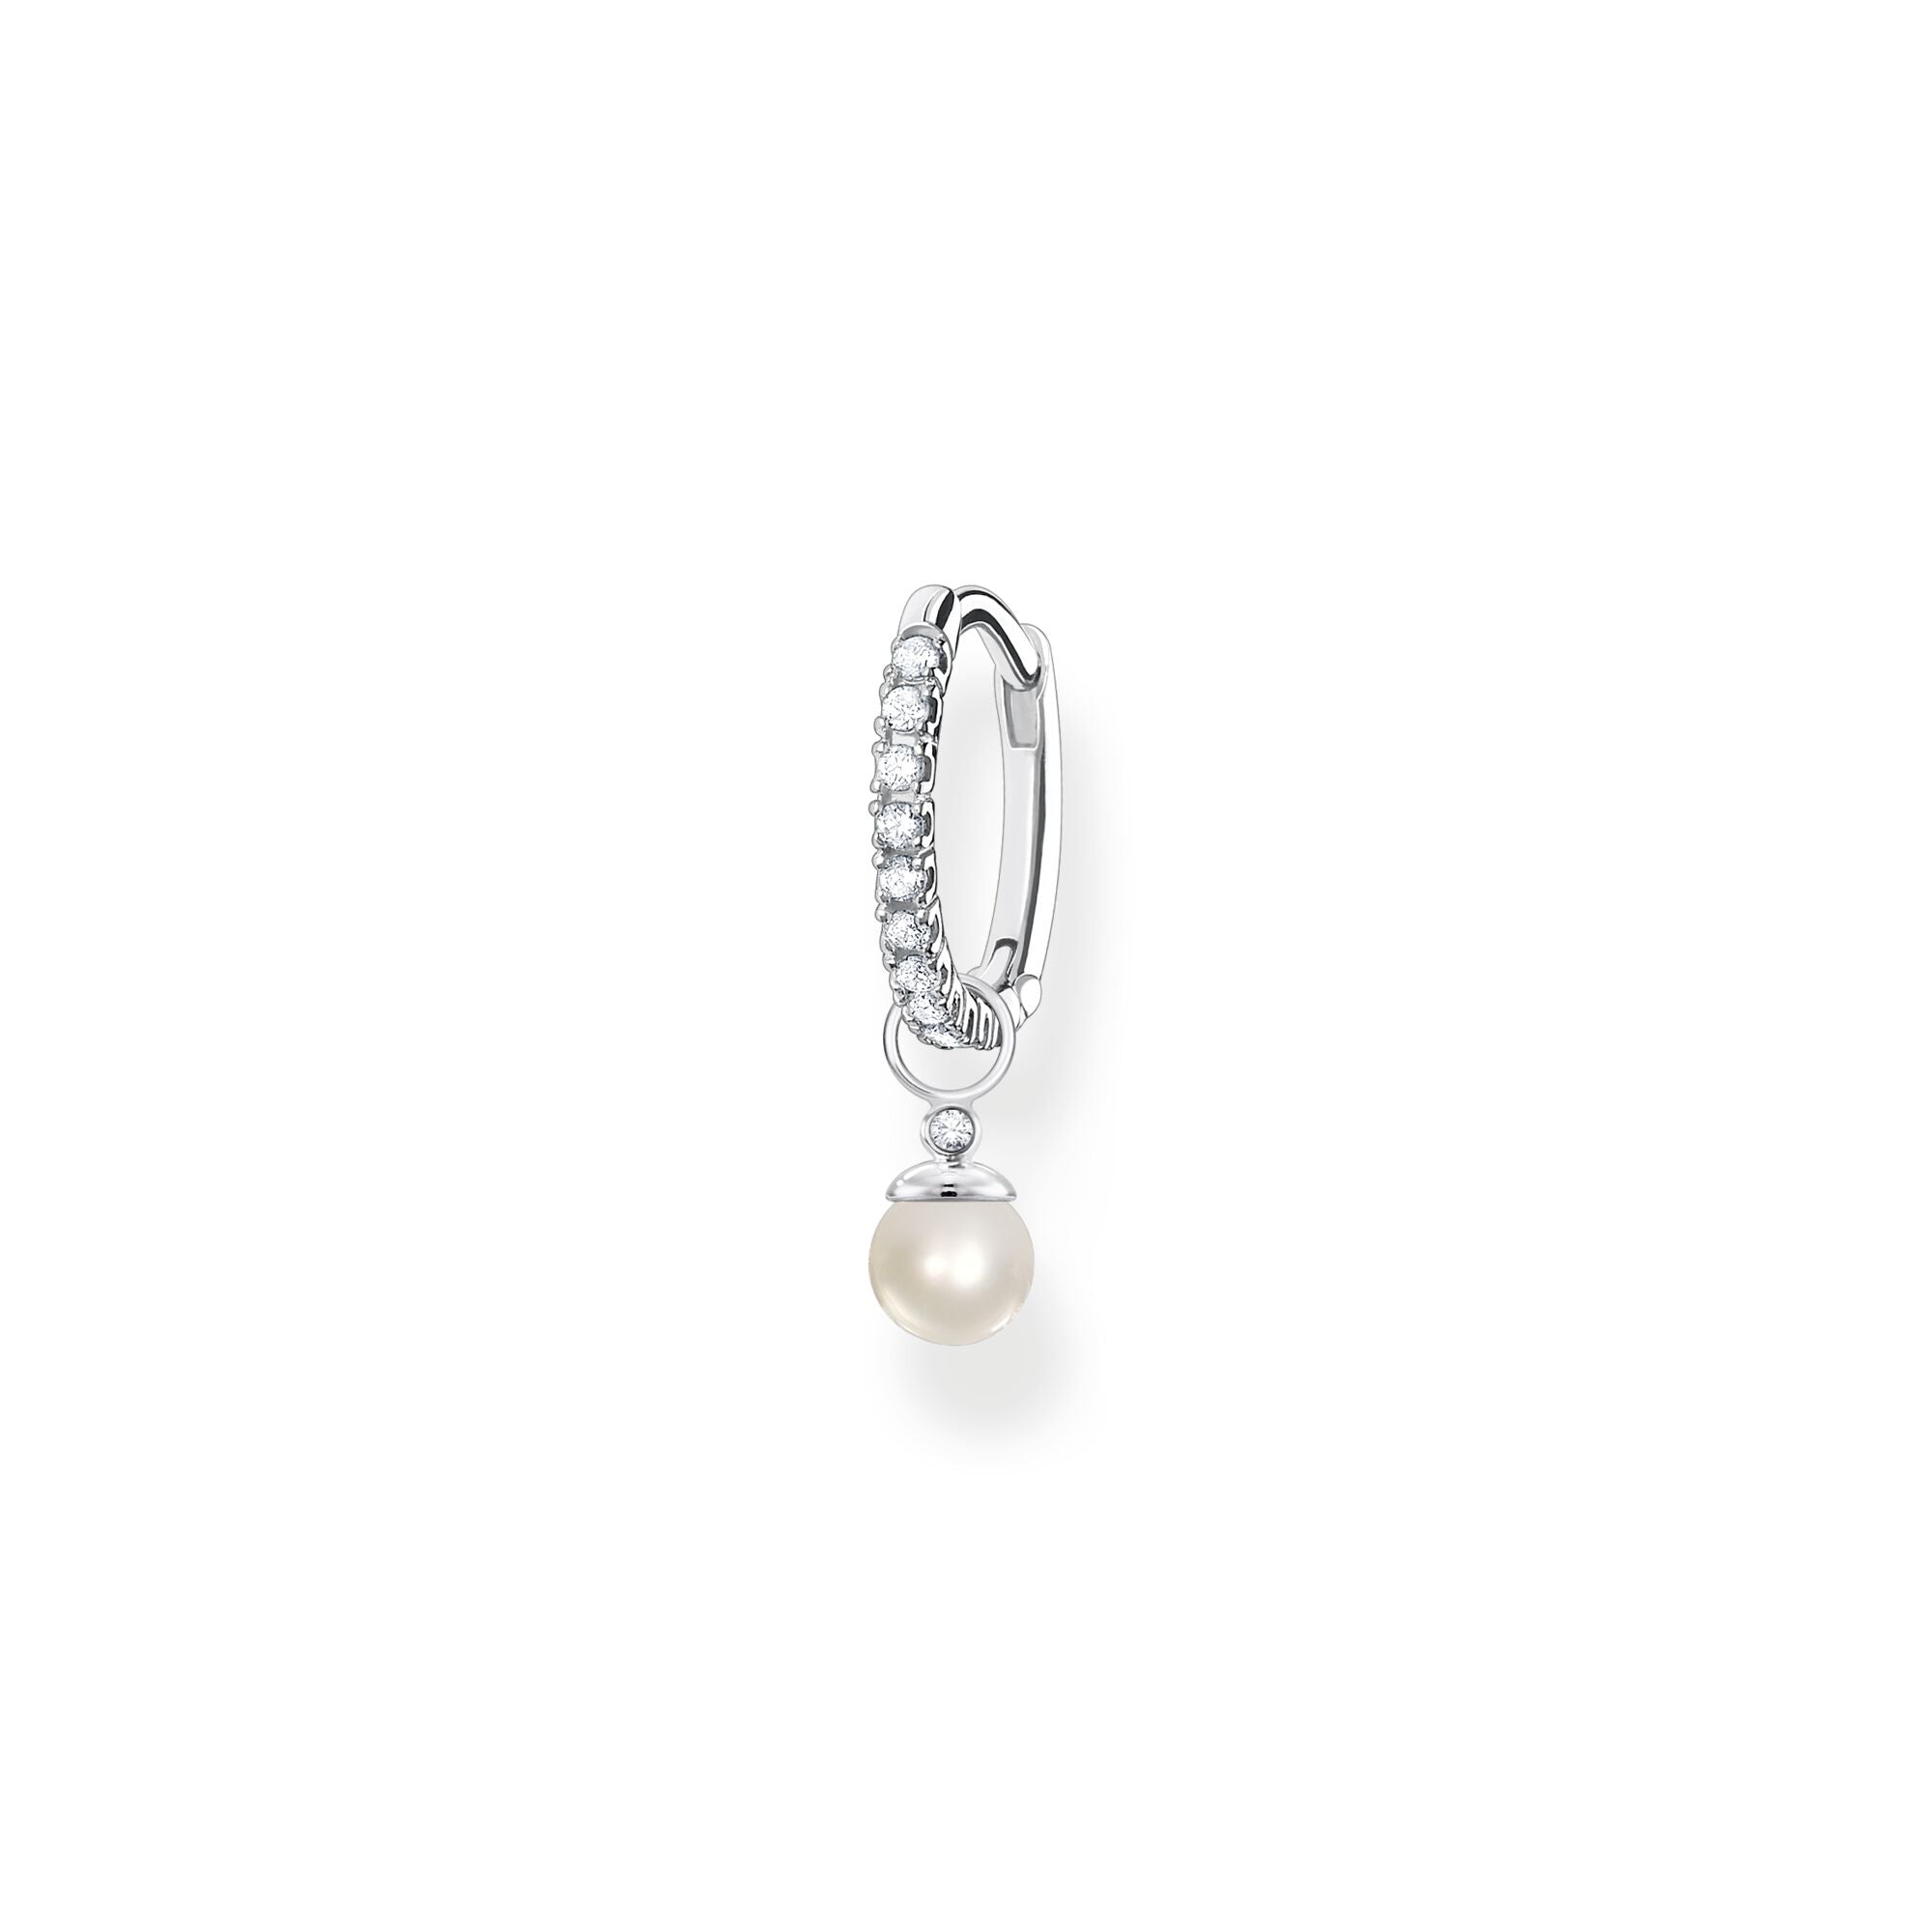 Thomas Sabo Single Studded Hoop Earring with Pearl